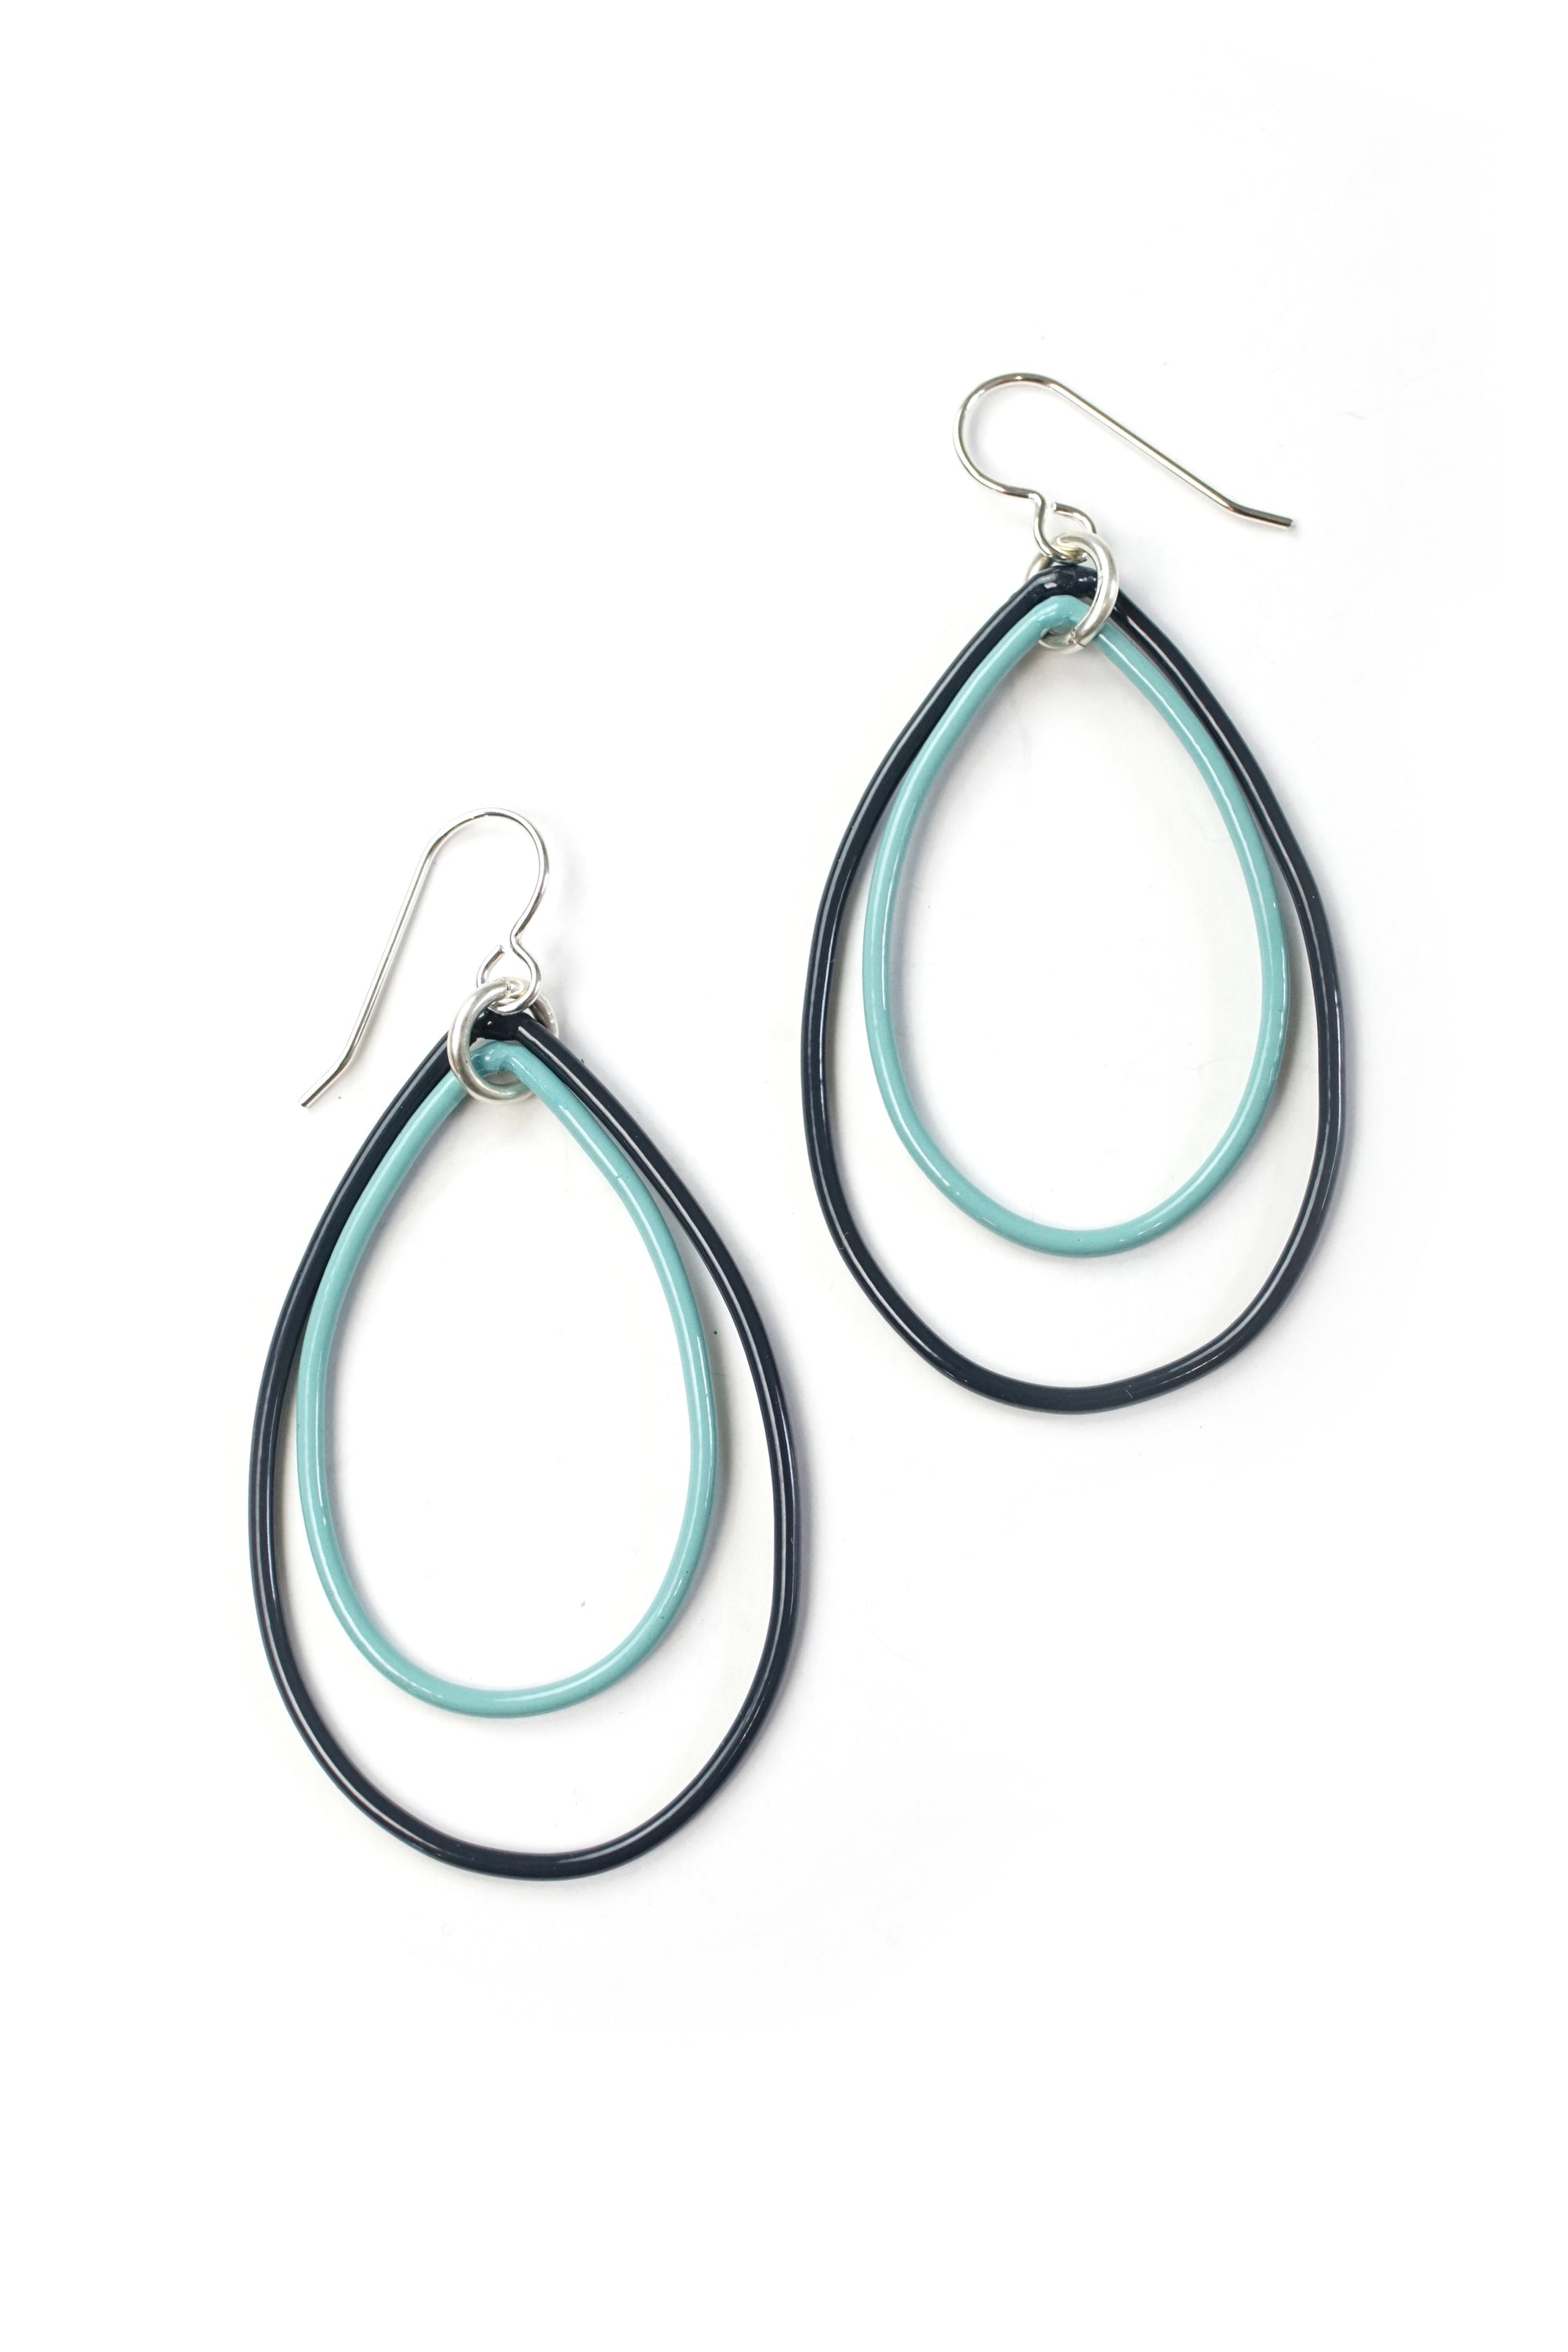 Rachel earrings in Midnight Grey and Faded Teal